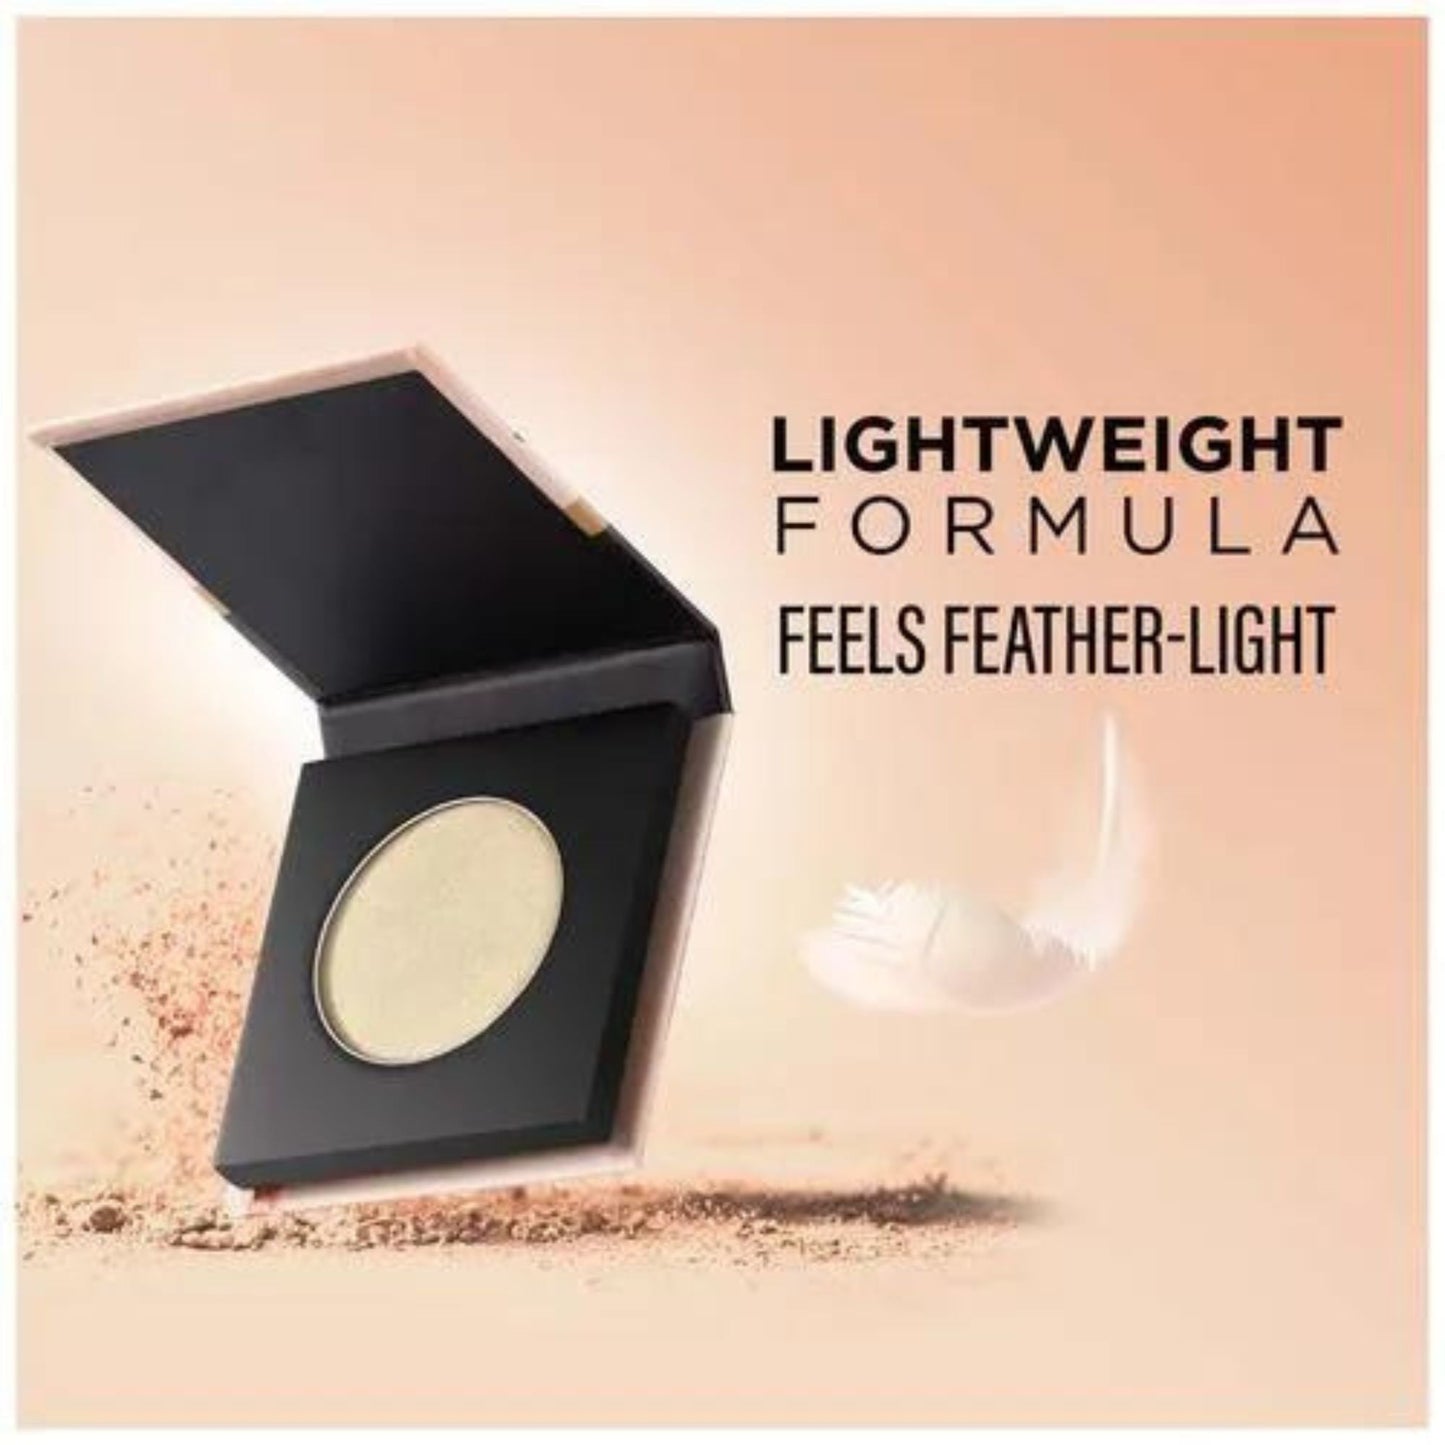 Faces Canada All That Glows Highlighter - Sparkling Gold, Long Lasting, Lightweight, Vitamin C, Hello Sunshine, 4 g